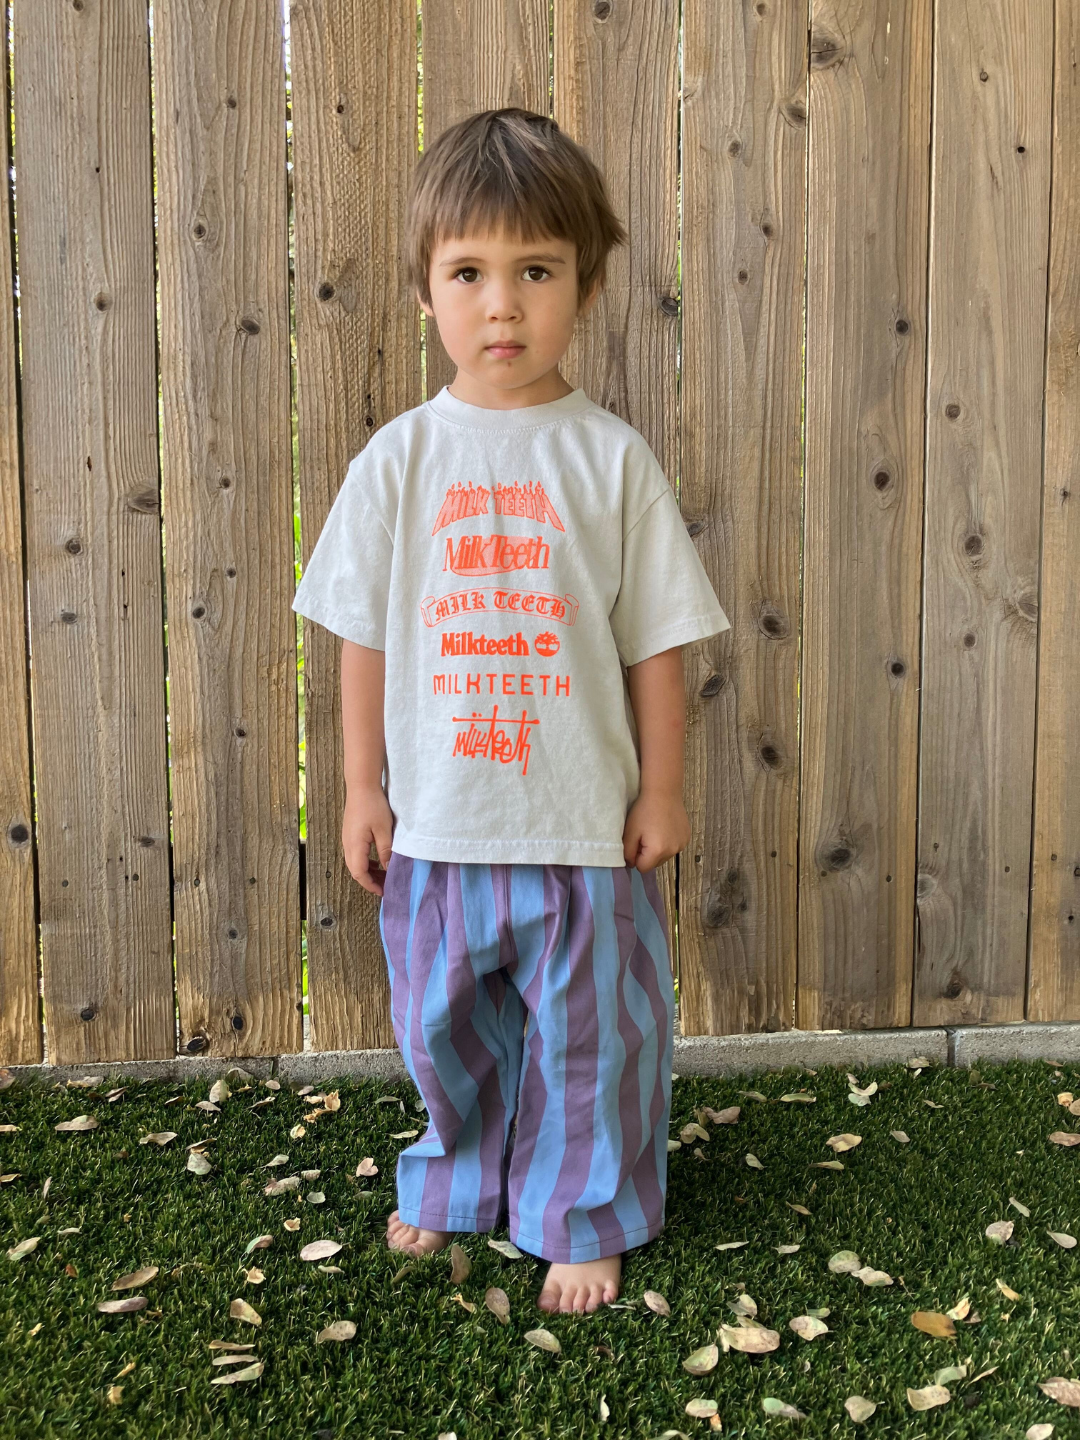 Cement | A child wearing a light grey t-shirt with Milk Teeth spelled out in various fonts in orange. He wears striped pants, is barefoot, and stands on grass against a wooden fence.